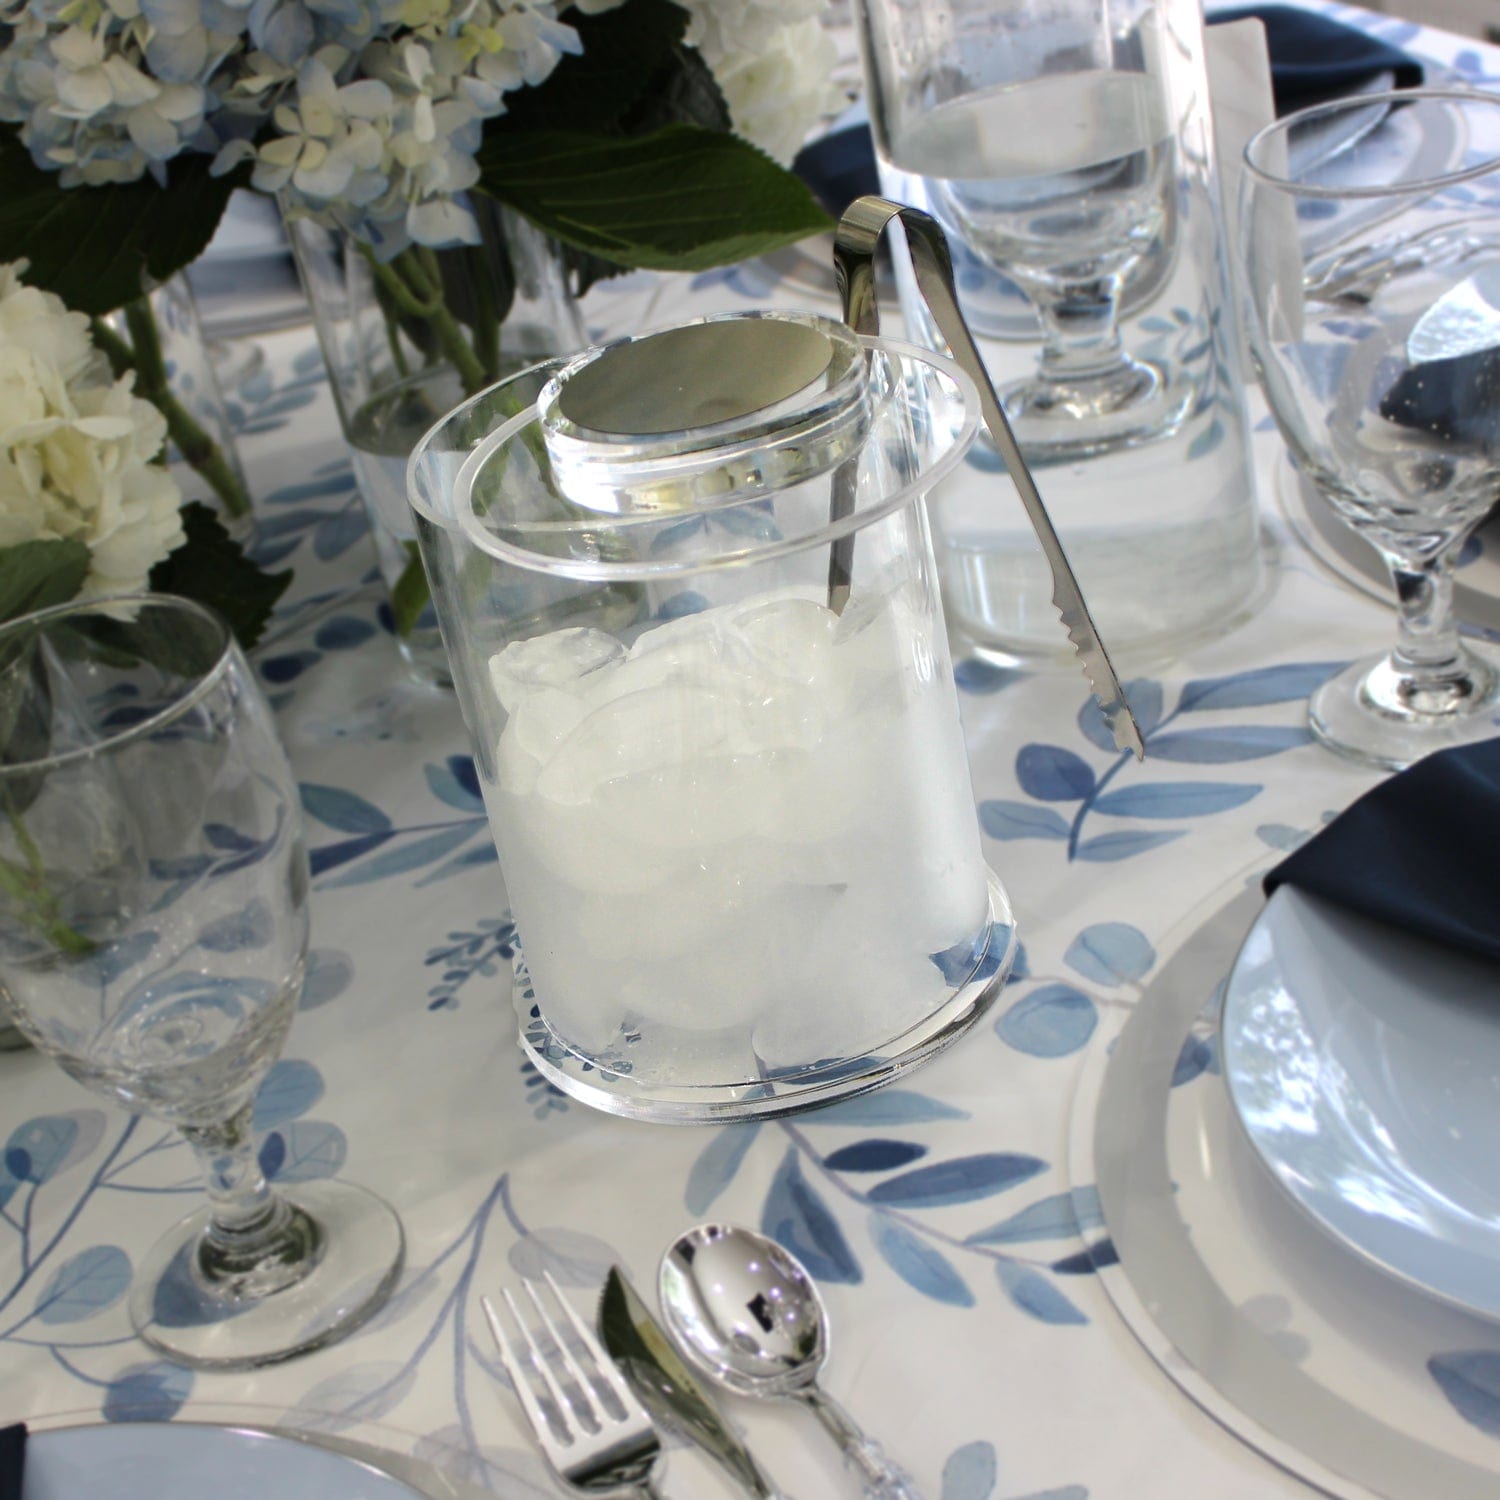 Blue & White Floral Tablescape - Waterdale Collection